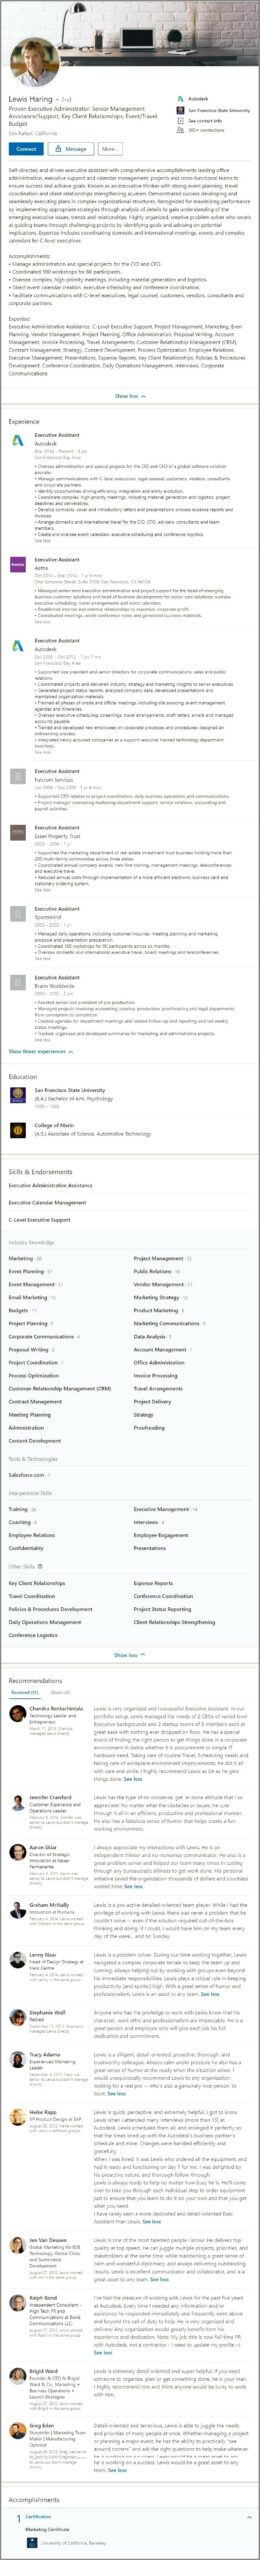 Resume Examples 2019 Administrative Assistant